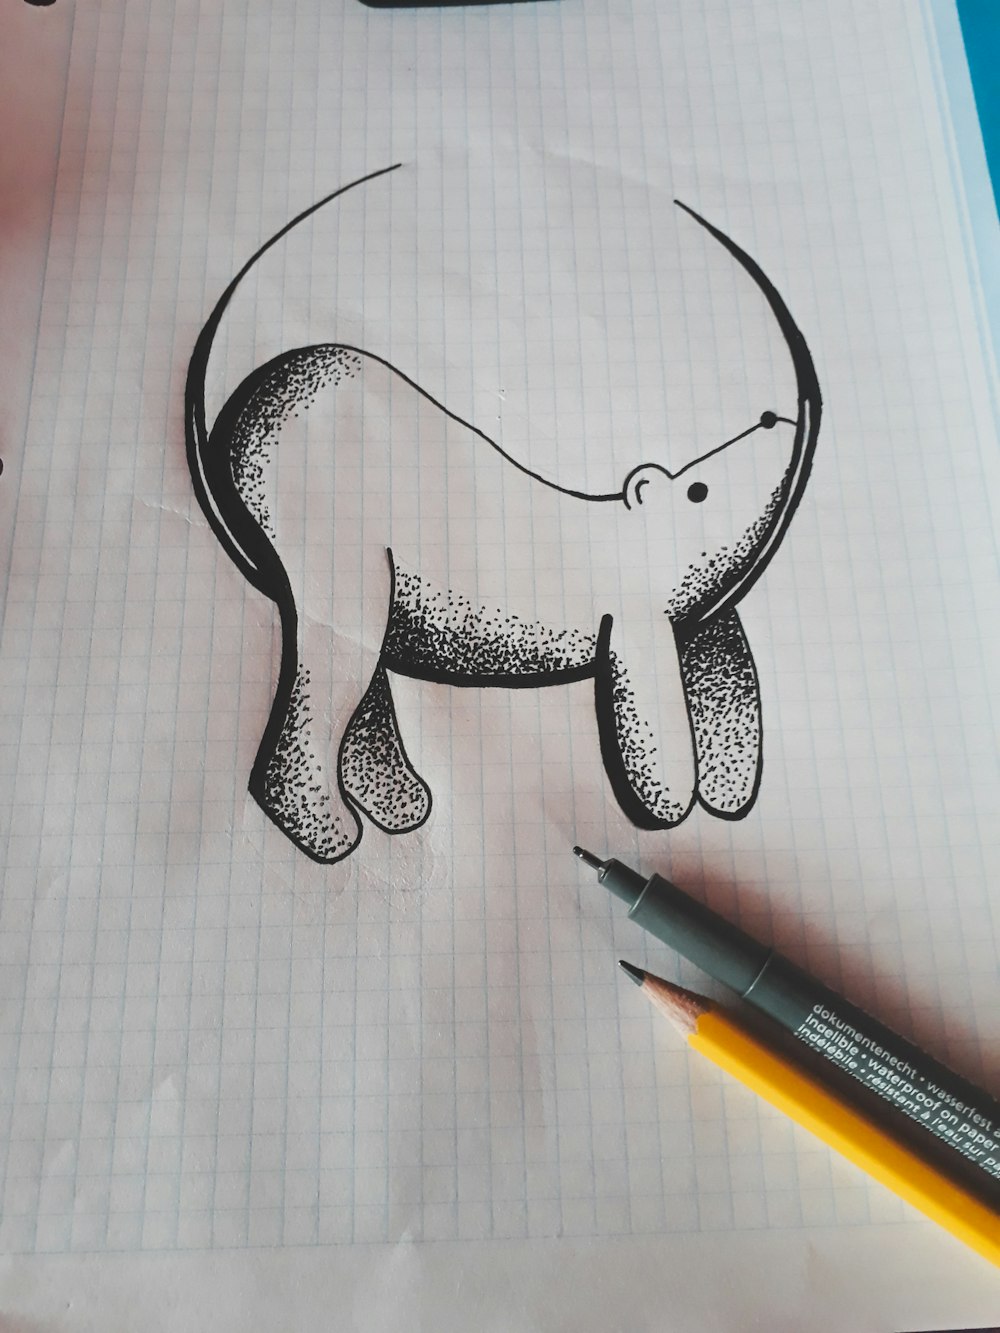 A drawing of a polar bear sitting on a crescent moon.